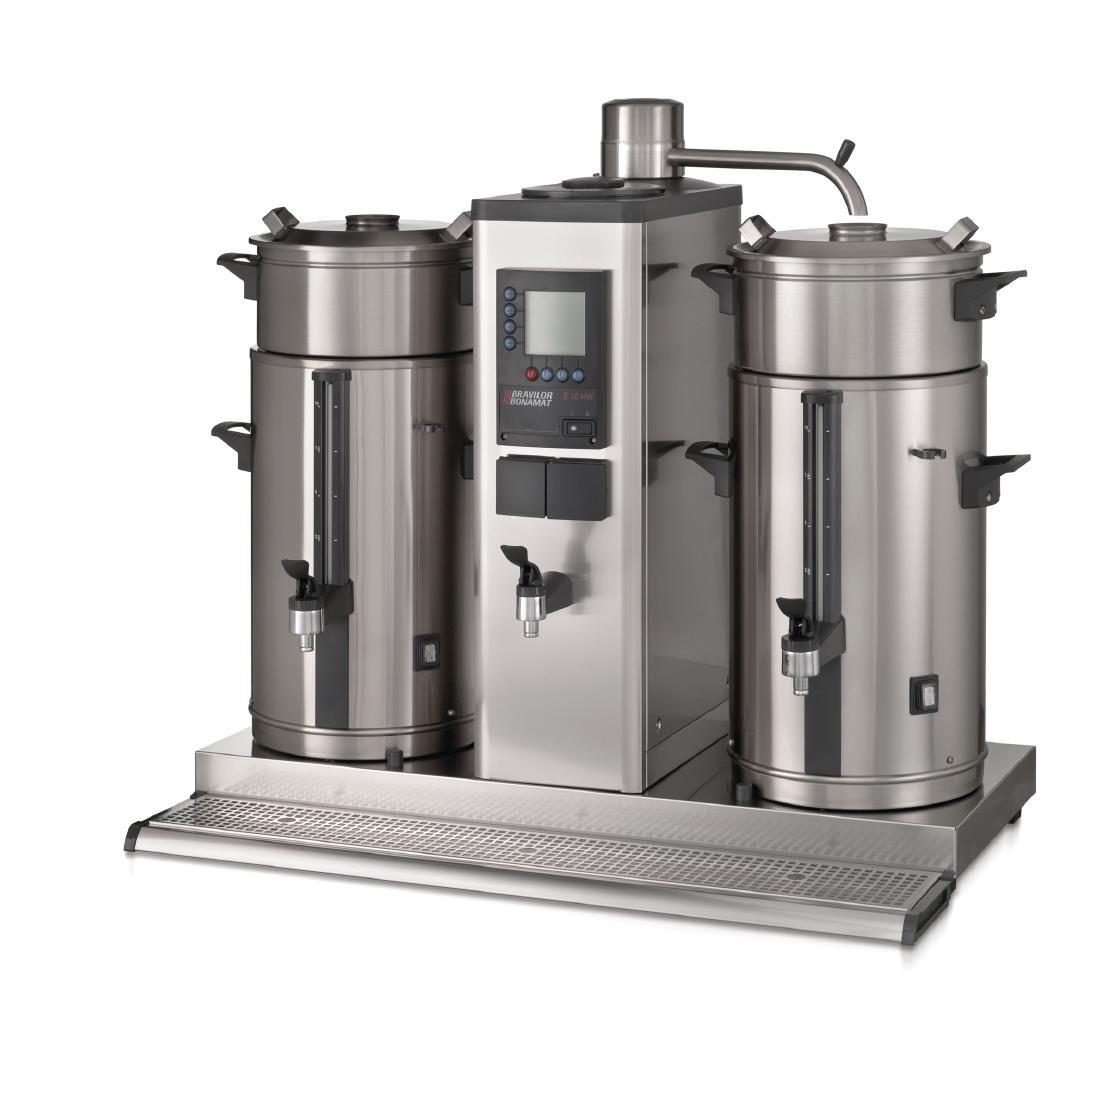 Bravilor B10 HW Bulk Coffee Brewer with 2x10Ltr Coffee Urns and Hot Water Tap 3 Phase - DC690-3P  - 1